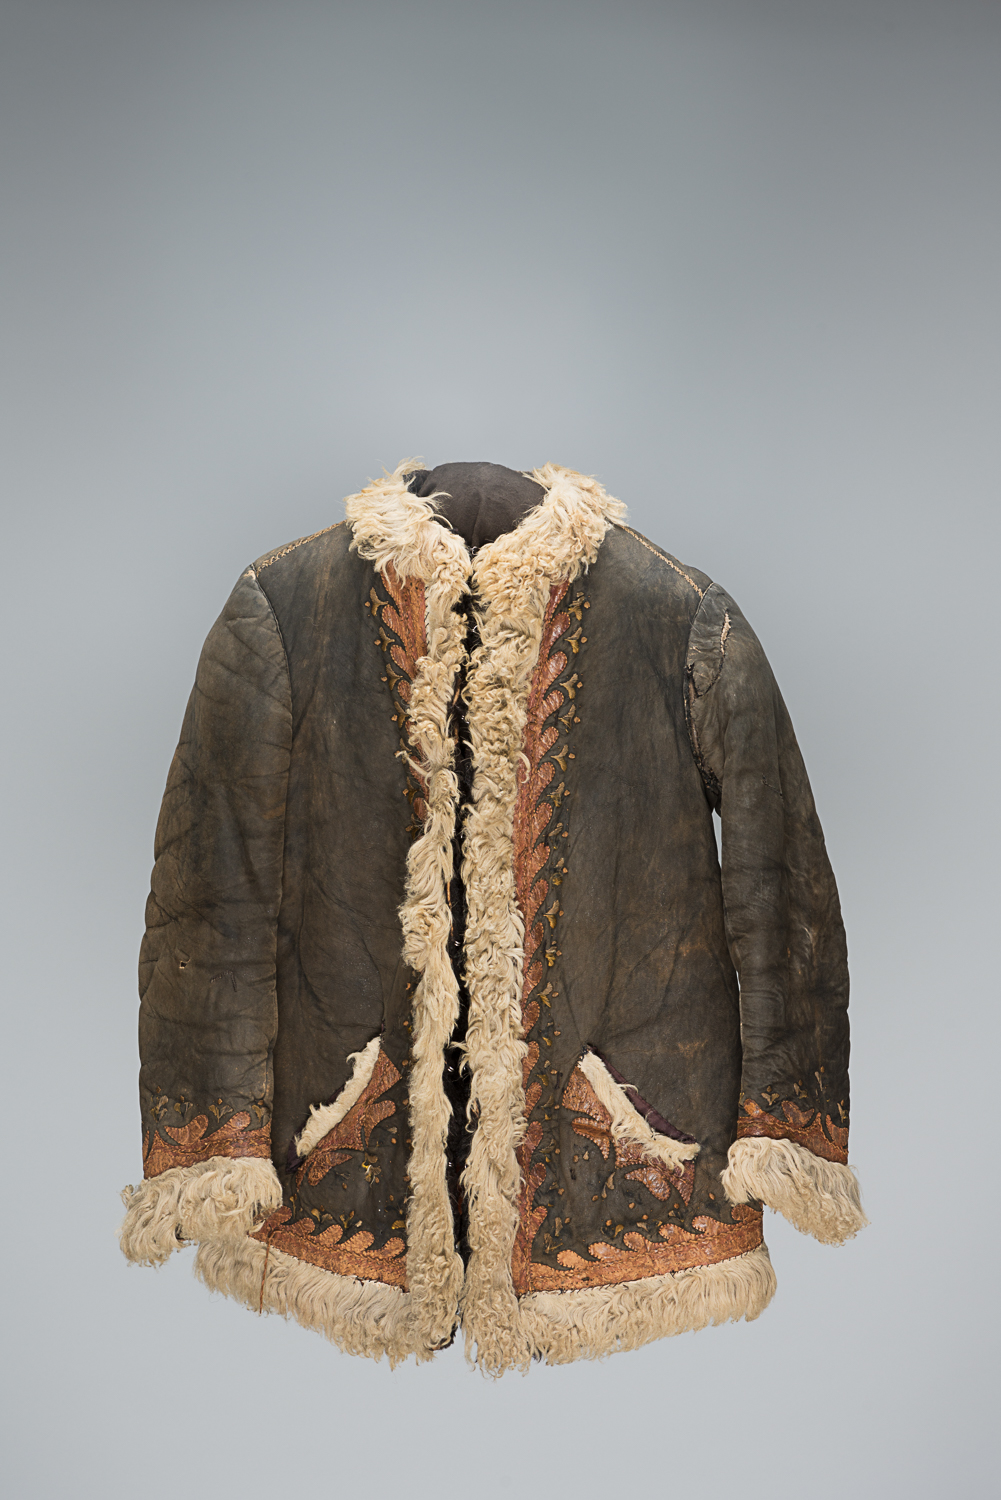 This leather jacket is lined with sheepskin and embroidered with pink details. It belonged to Blanca Pinsker from Bialystok, Poland.